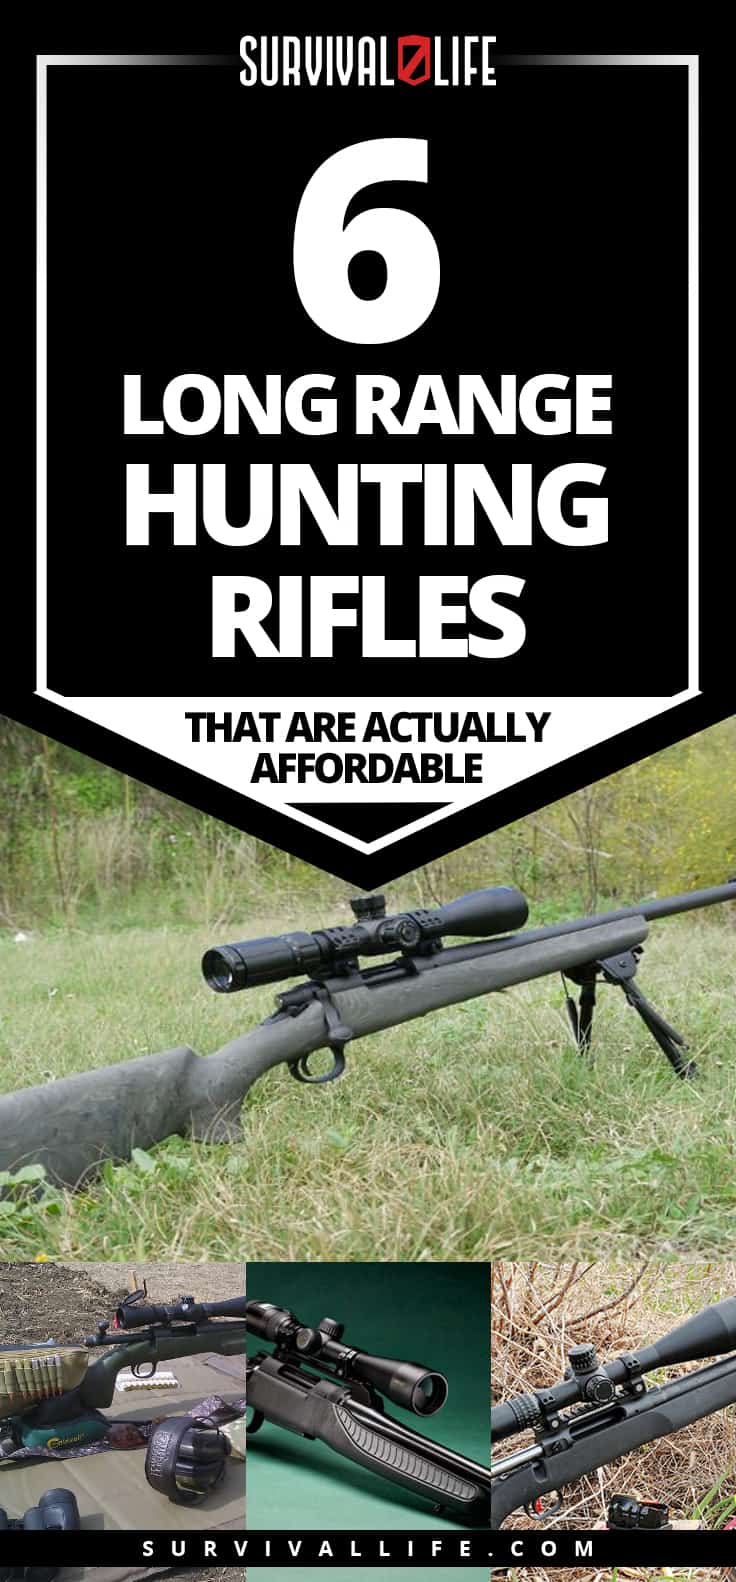 Finally: 6 Long Range Hunting Rifles That Are Actually Affordable